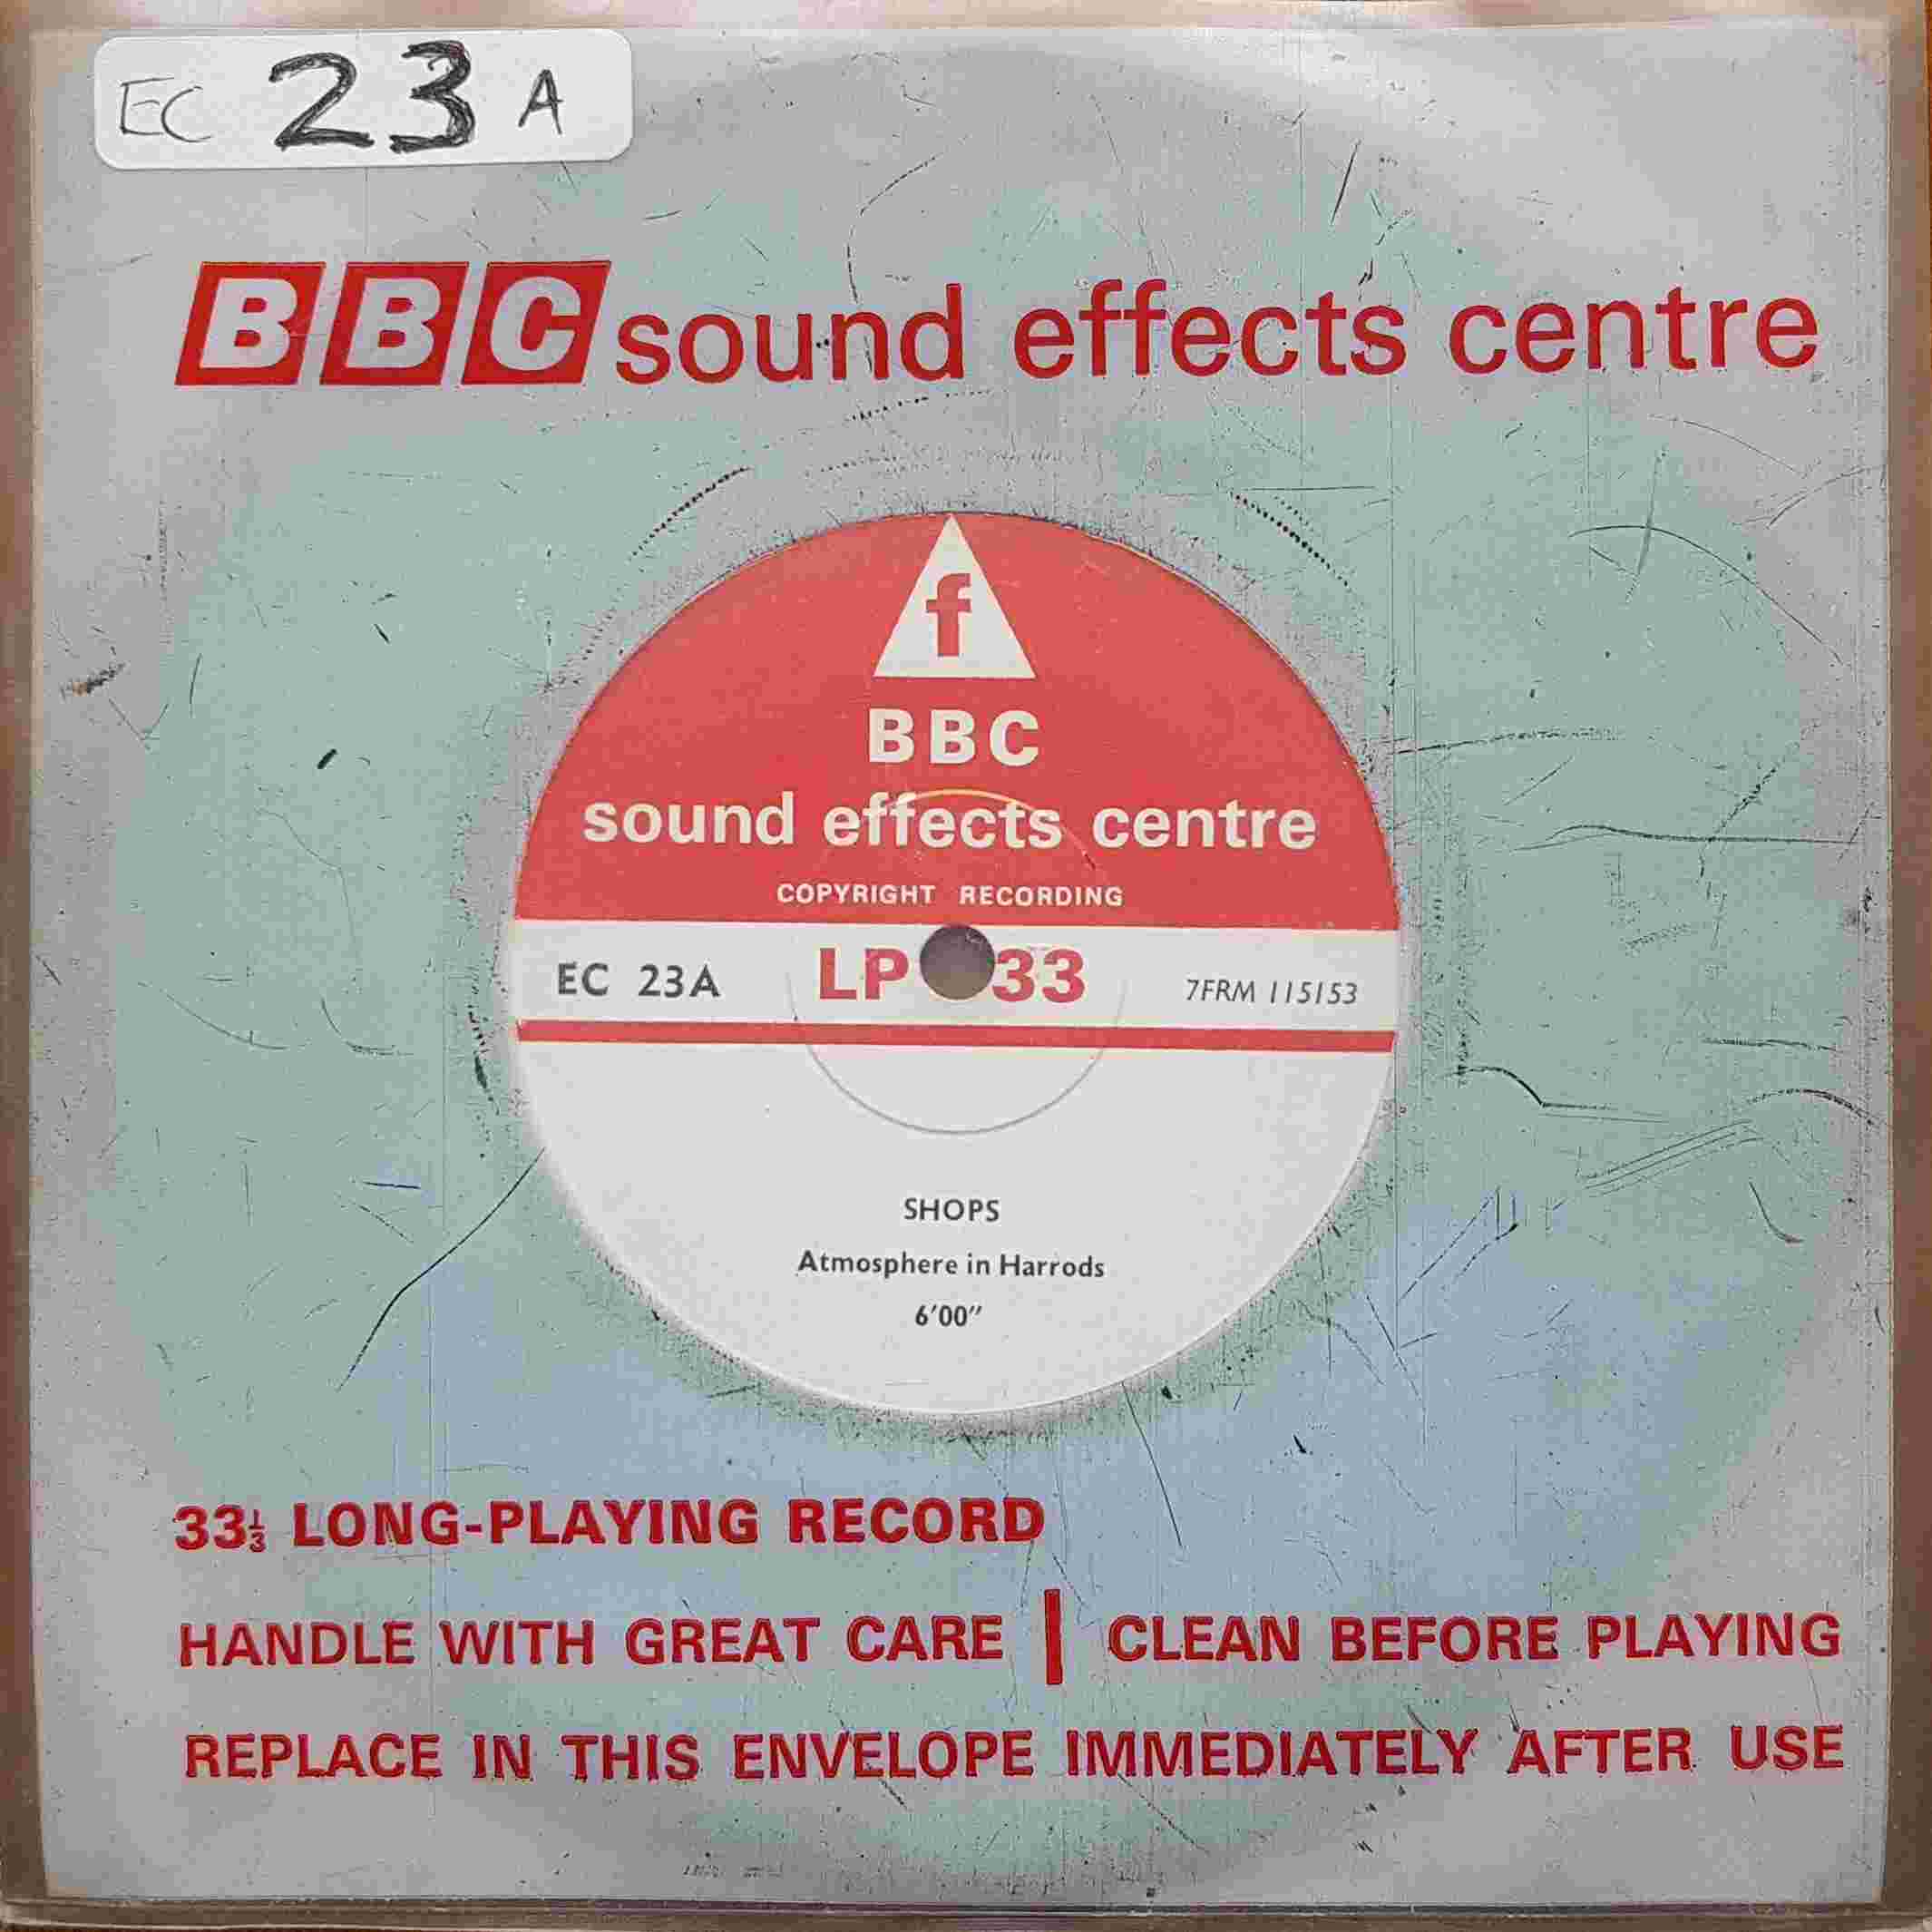 Picture of EC 23A Shops by artist Not registered from the BBC singles - Records and Tapes library